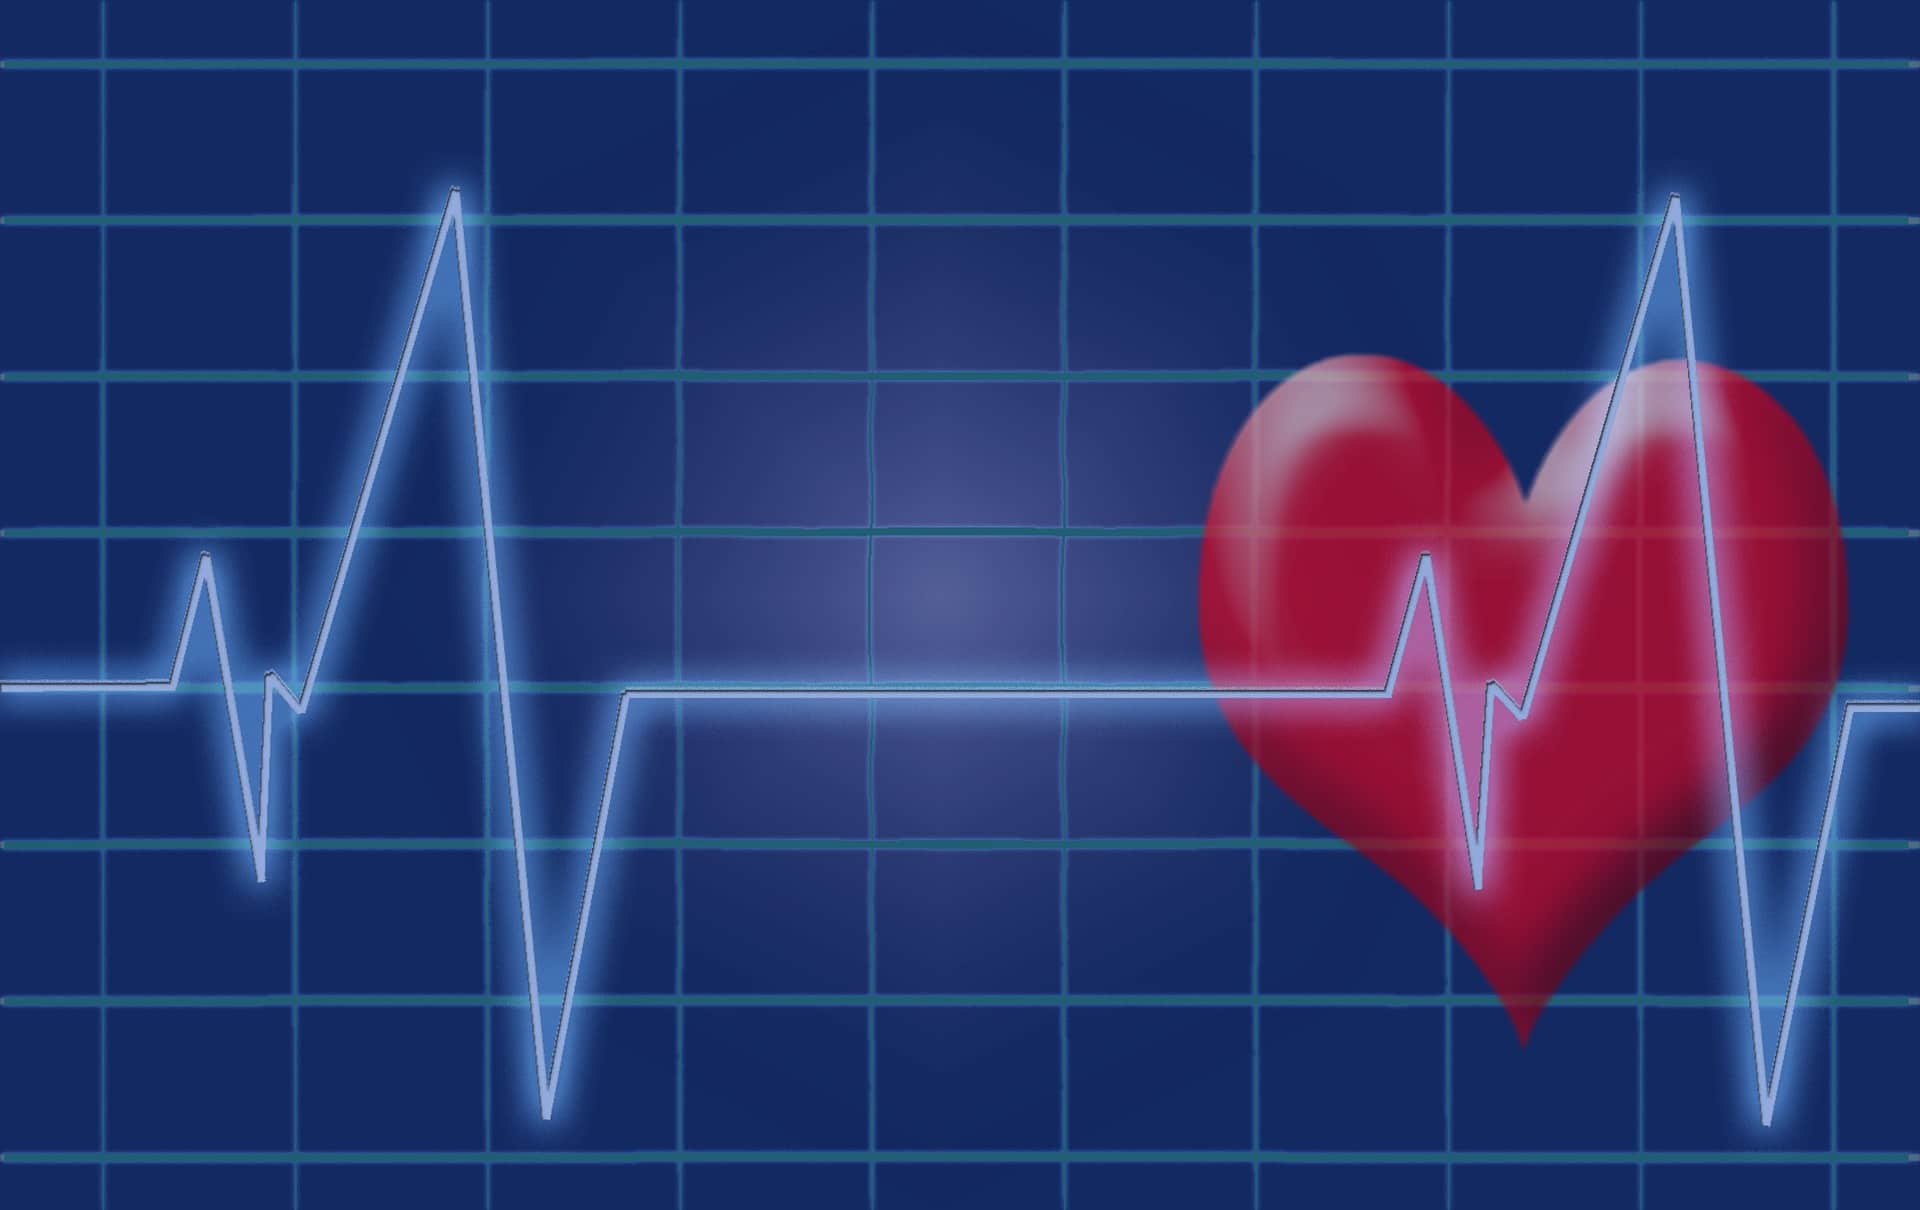 Intellewave and Heart Rate Variability: Applications in Anesthesia